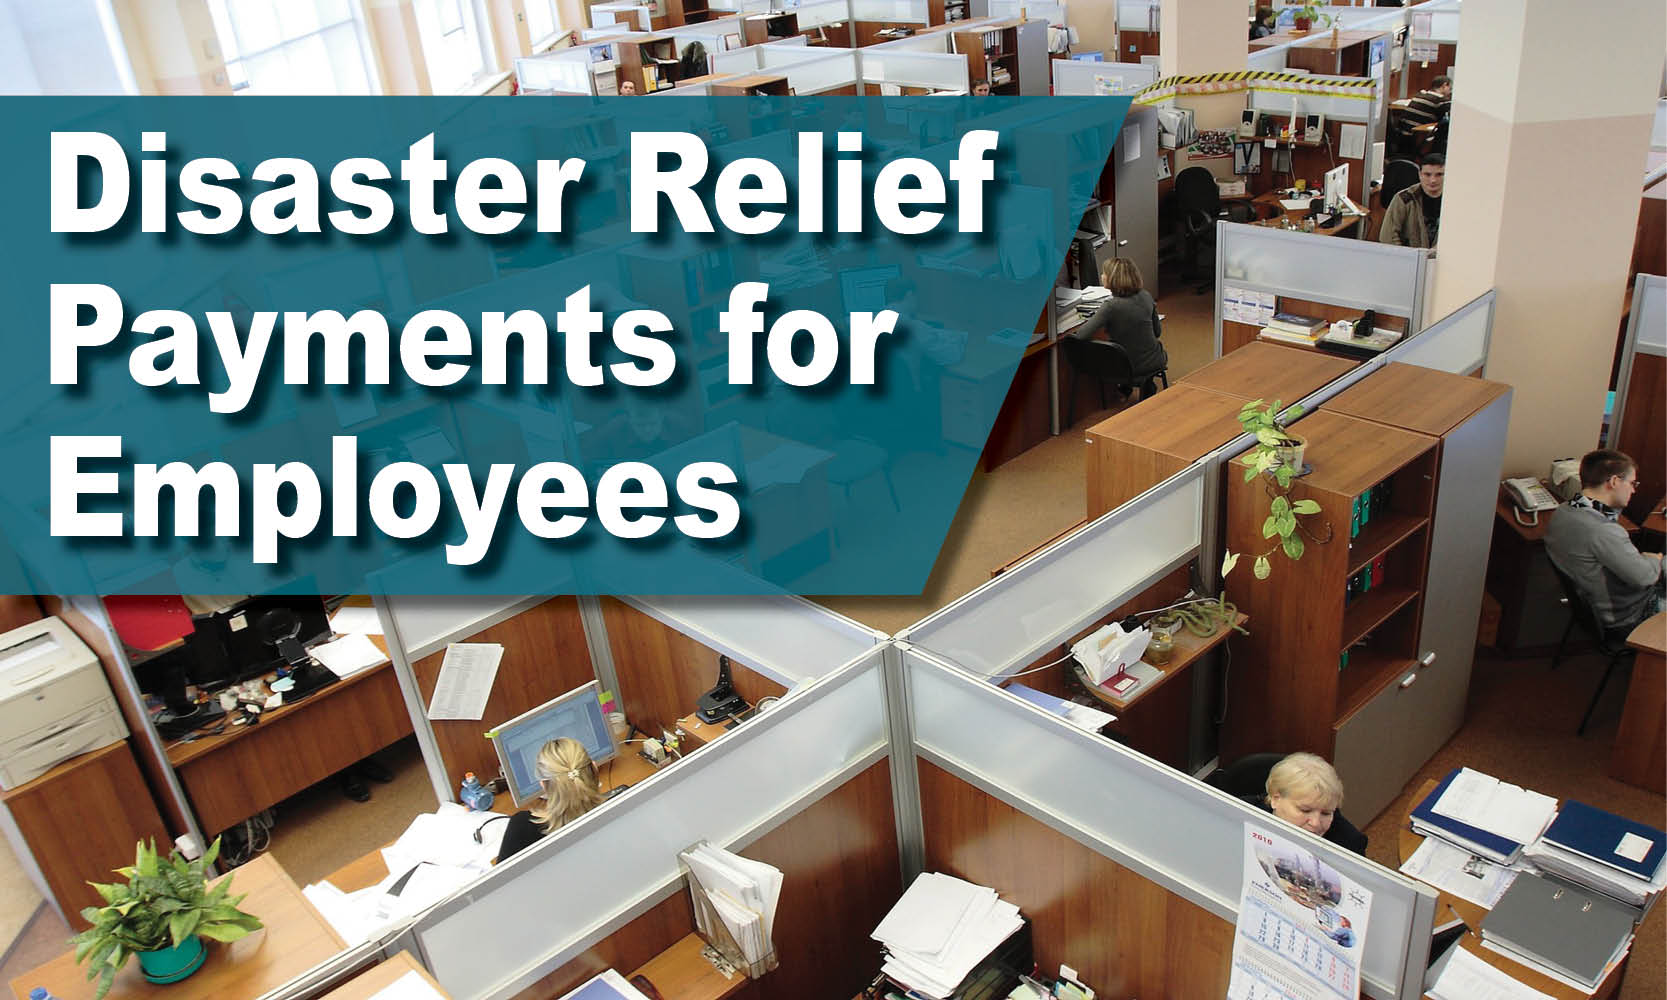 Disaster Relief Payments for Employees